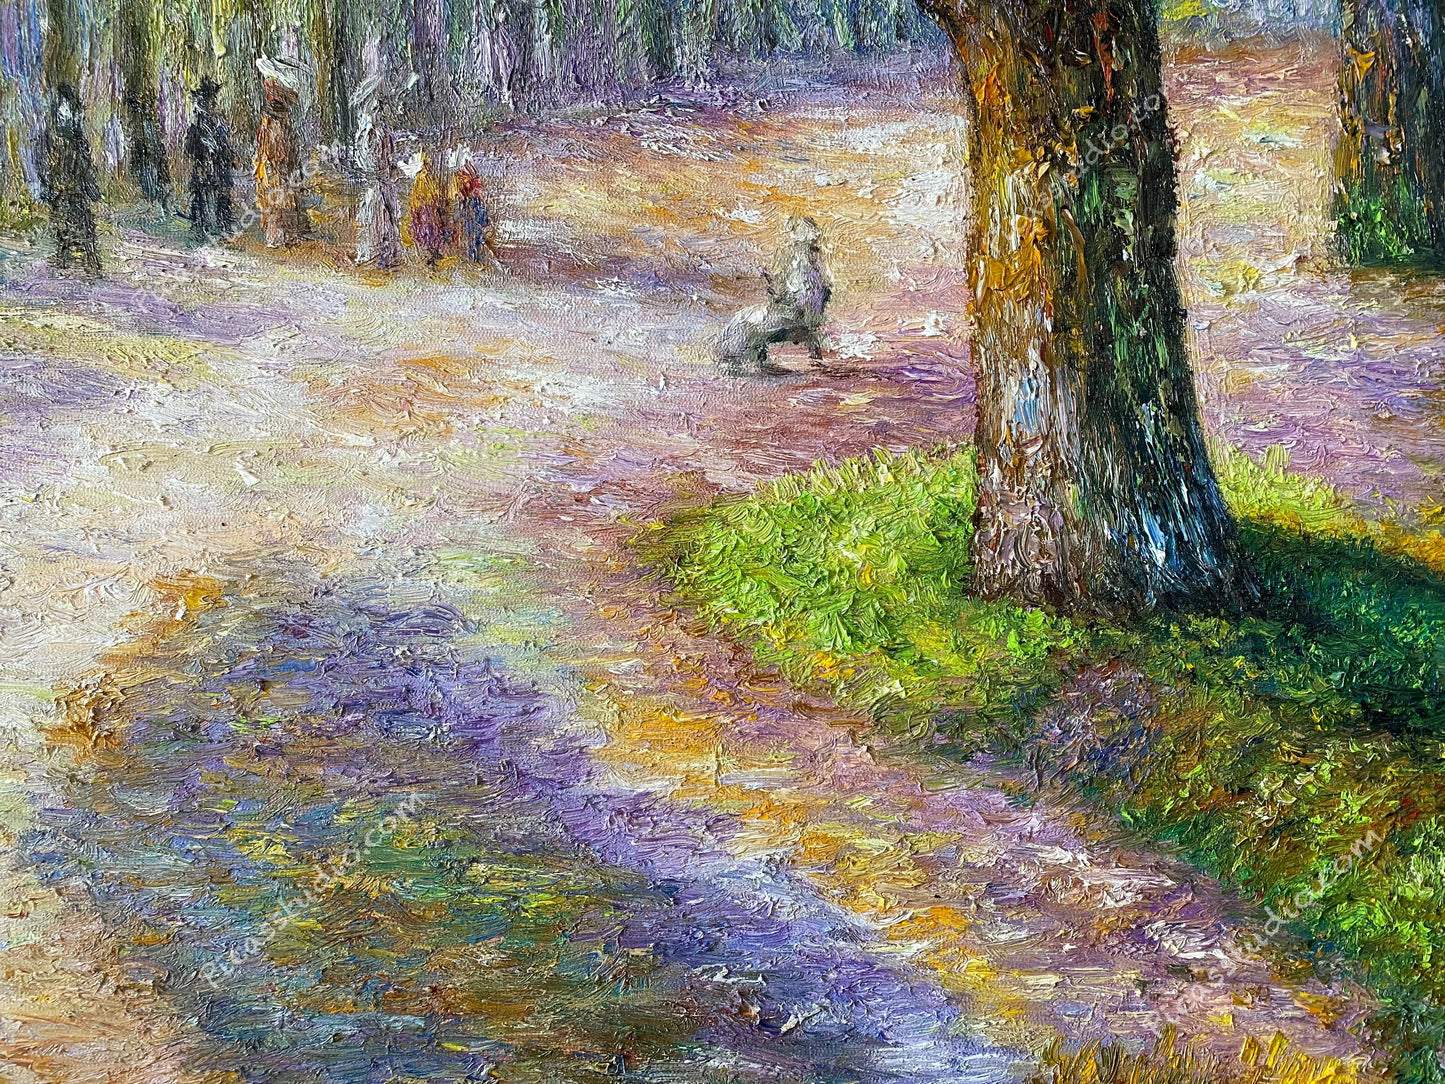 Hyde Park, London Camille Pissarro Oil Painting Landscape Hand Painted Art on Canvas Wall Decor Unframed